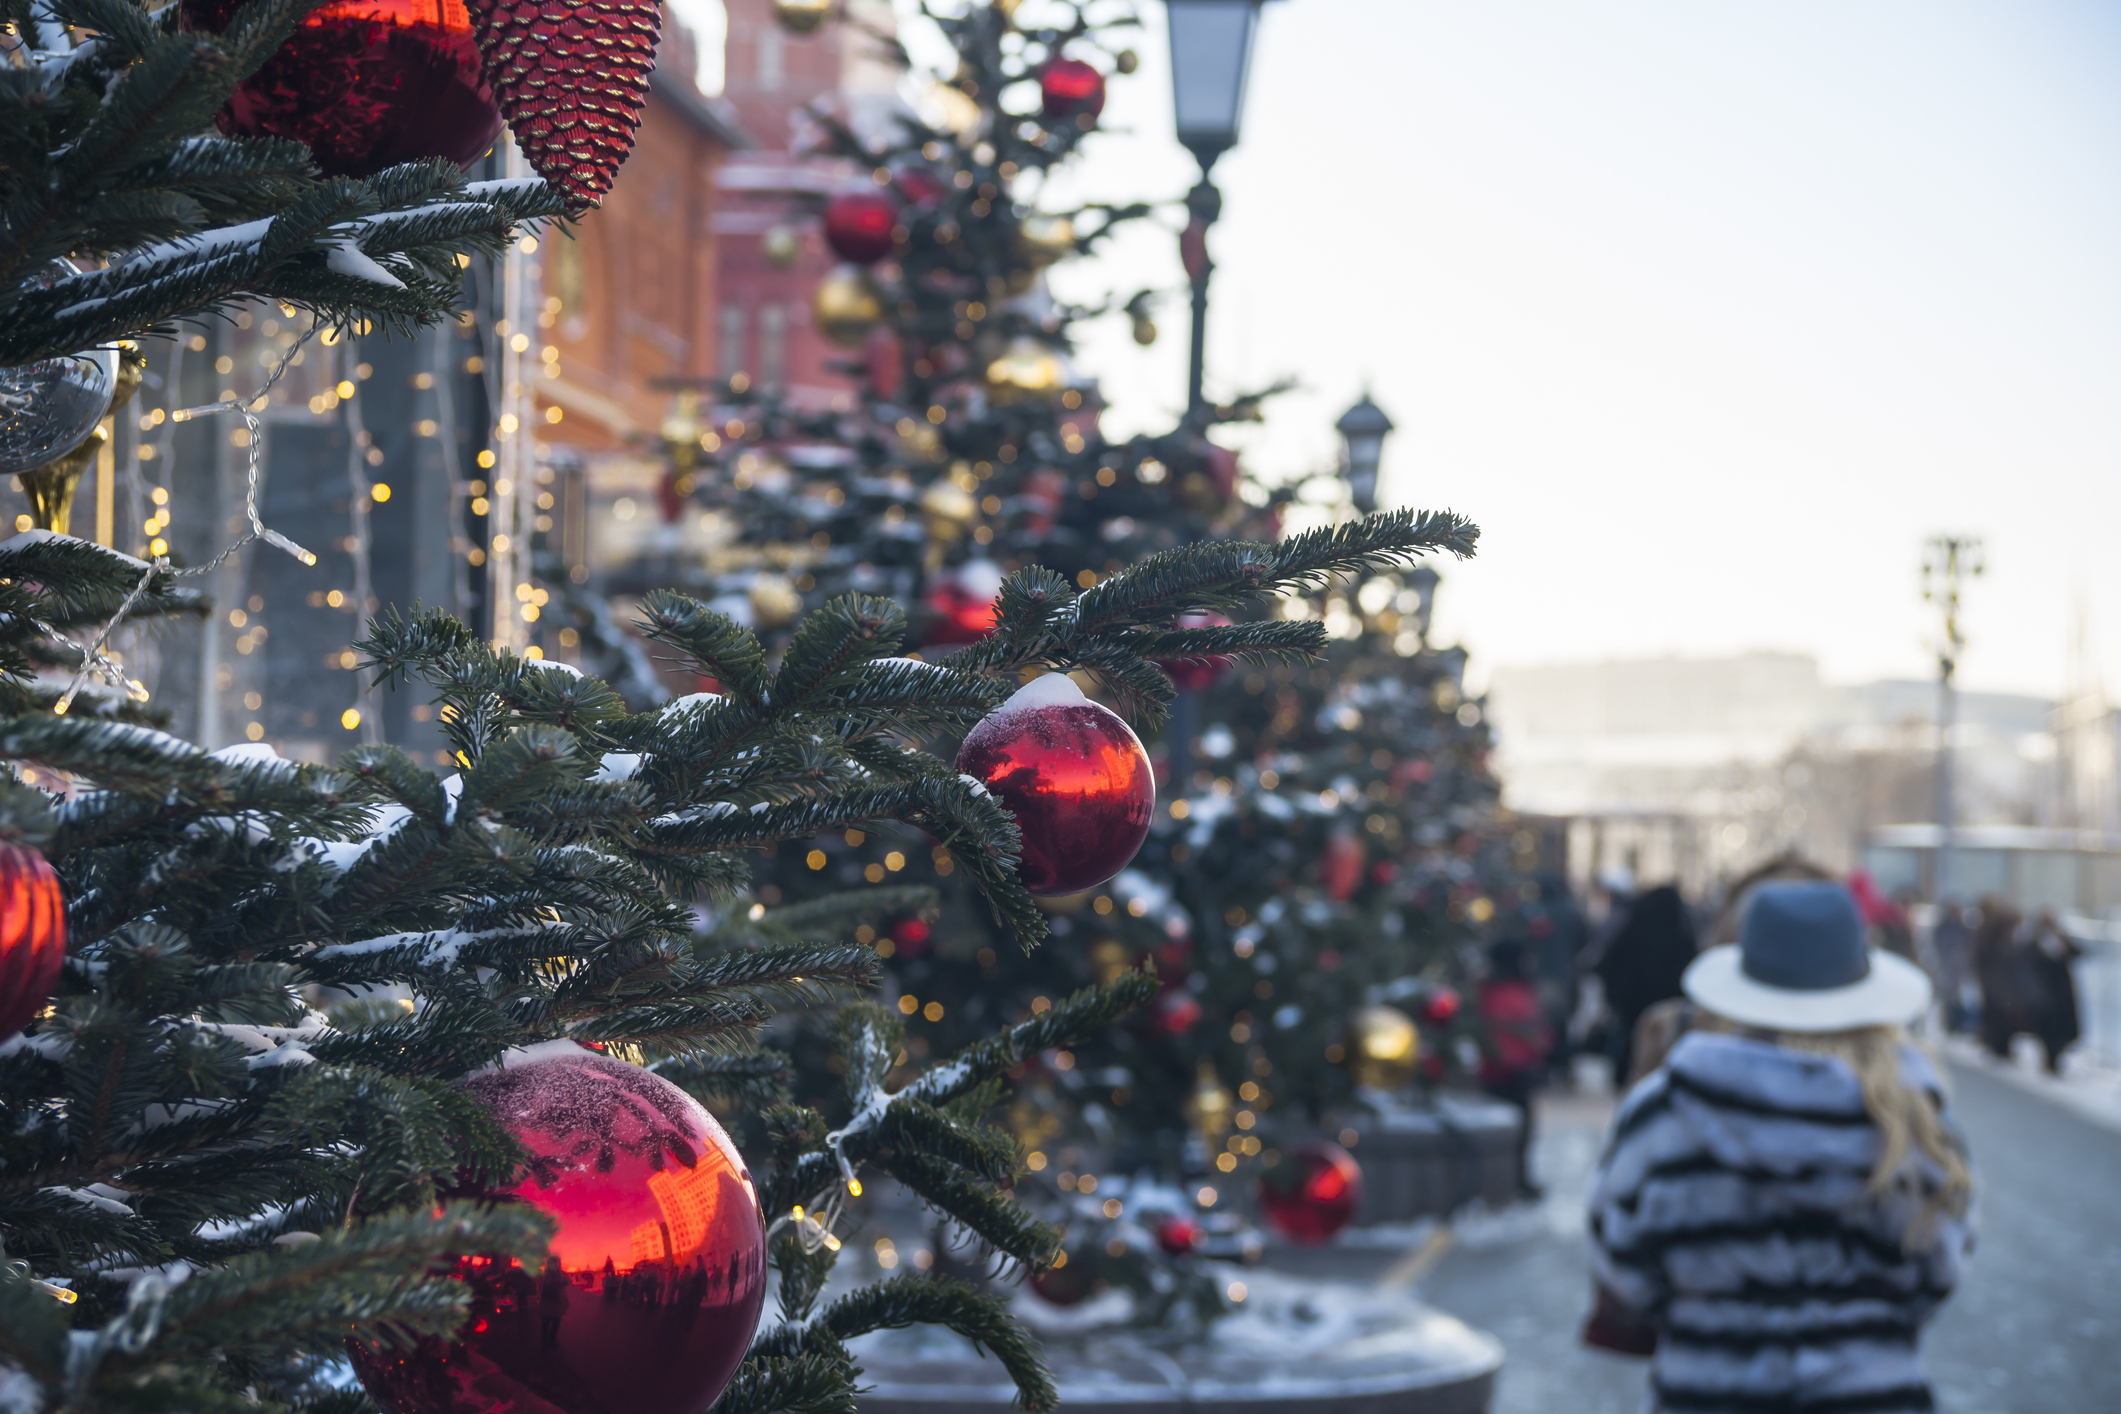 Row of decorated Christmas trees on the Red Square